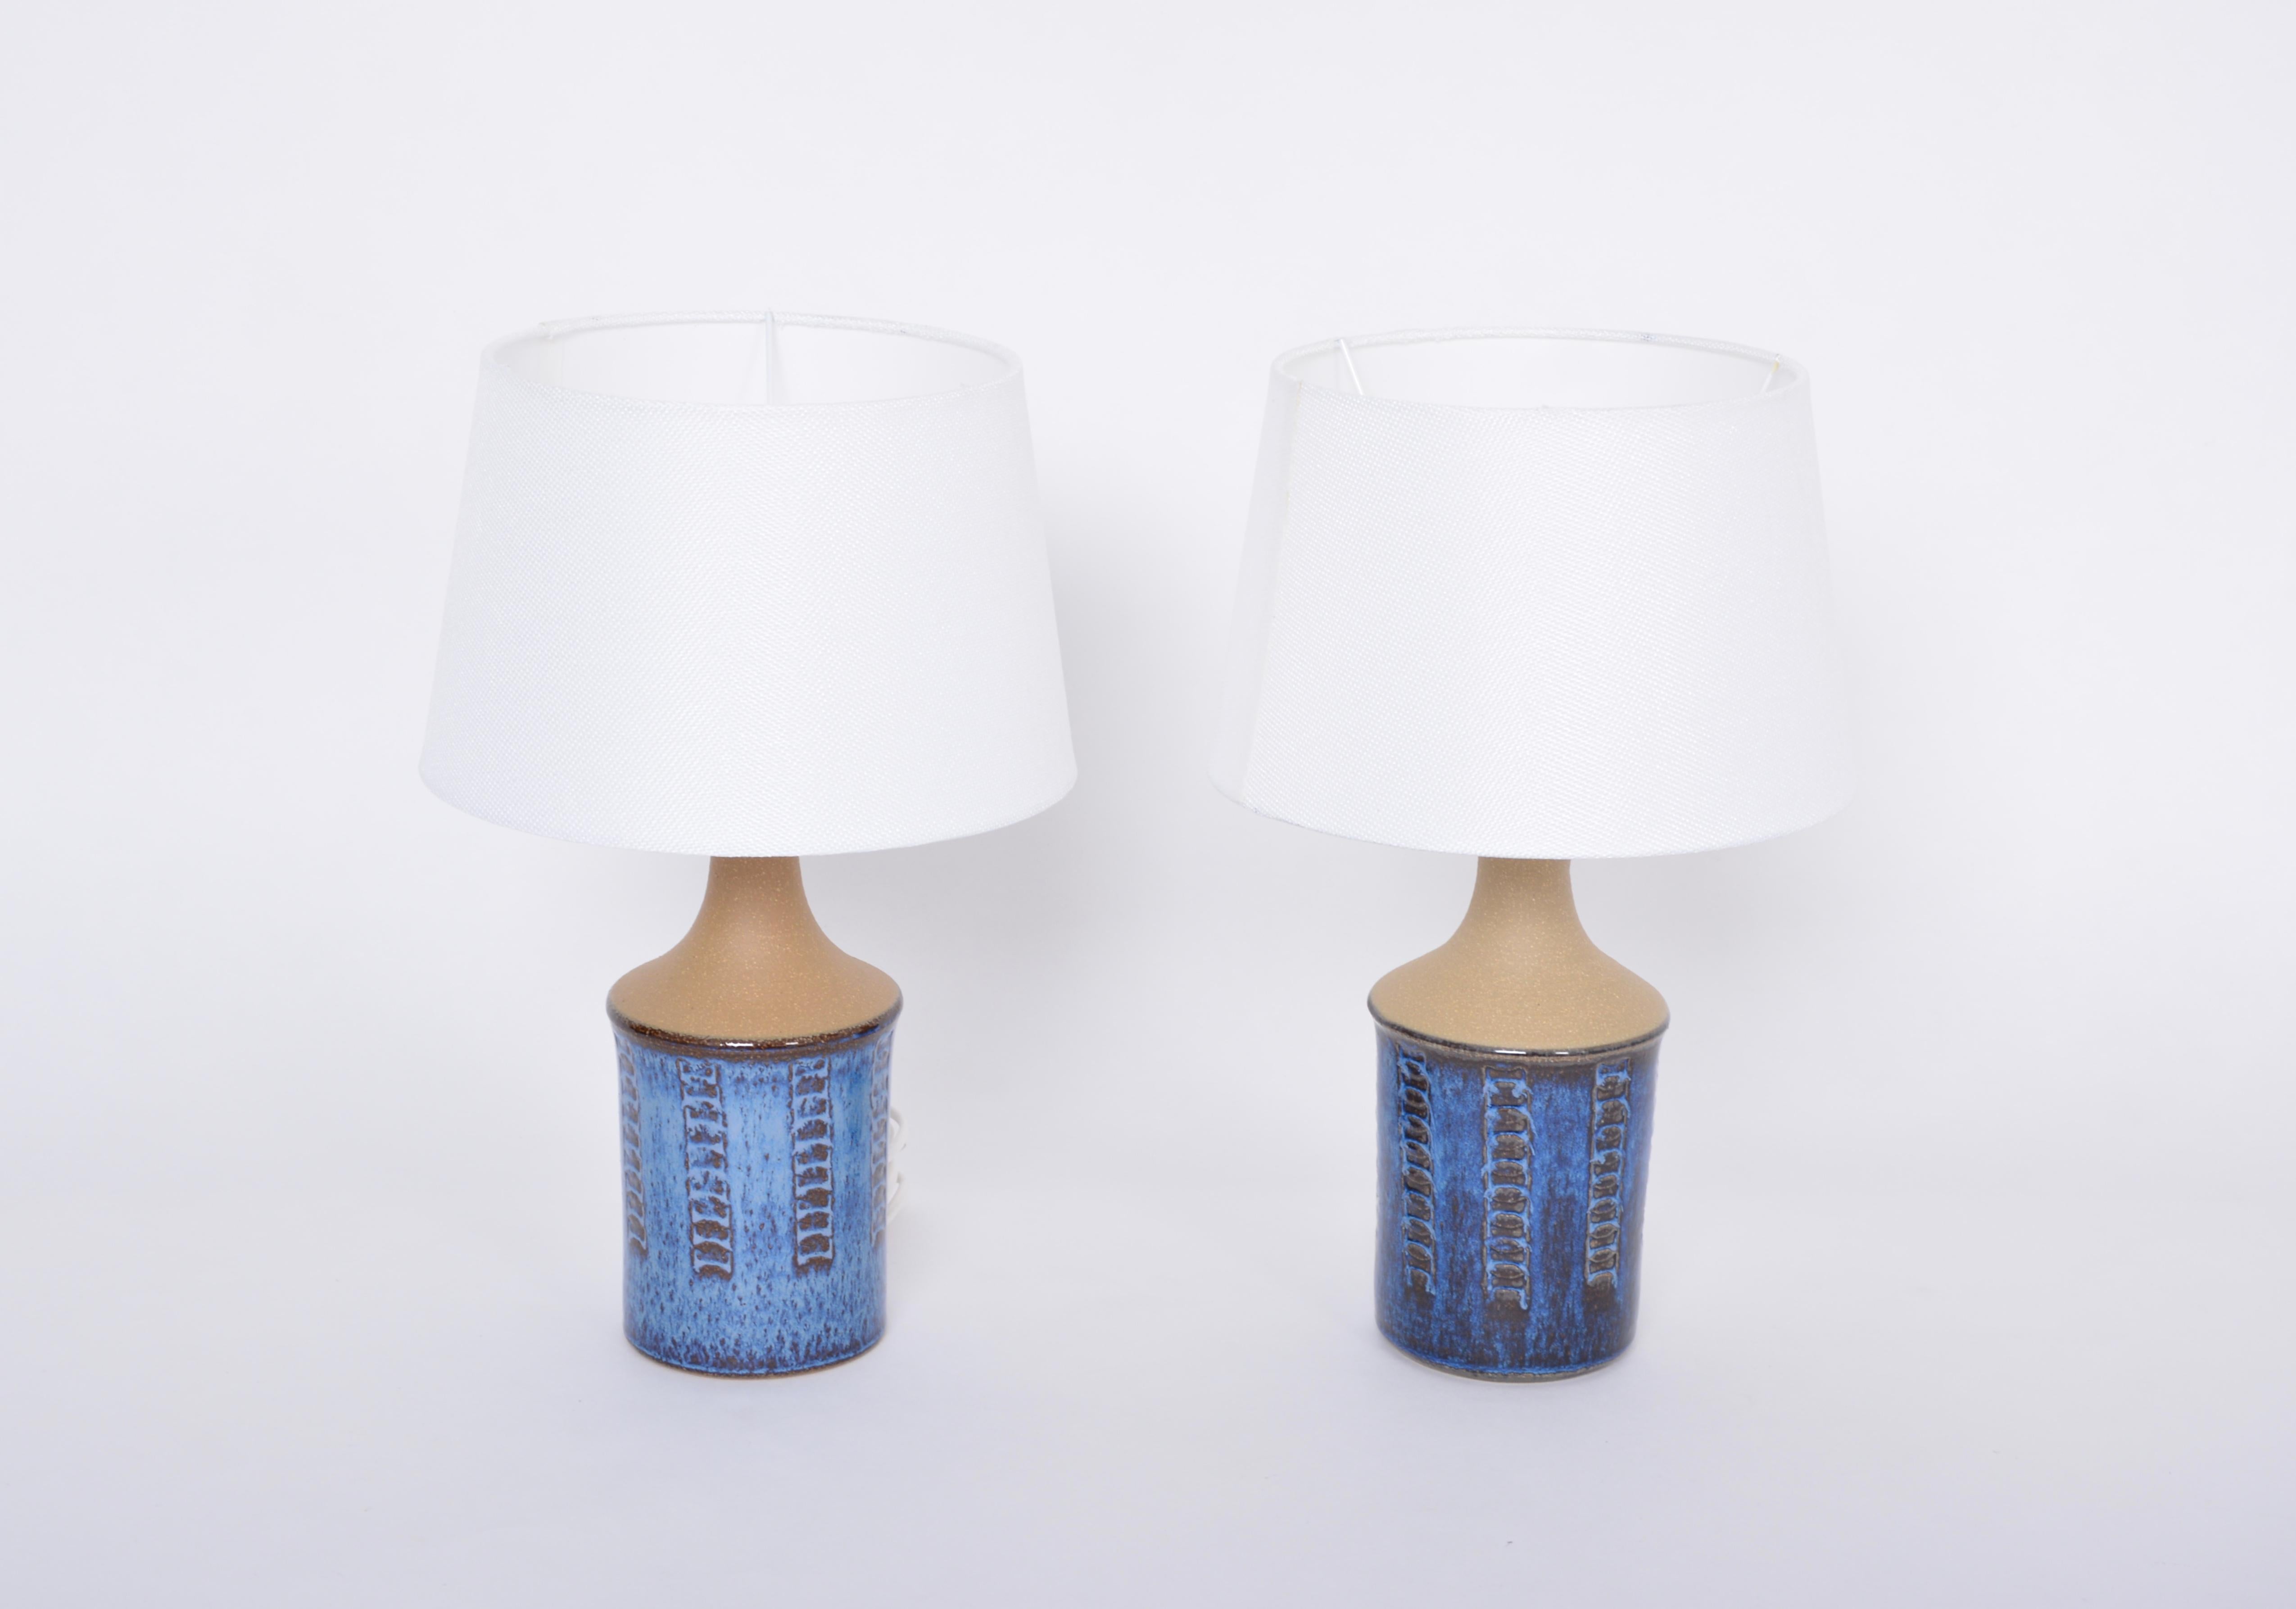 Pair of Small Blue Mid-Century Modern Table Lamps by Maria Philippi for Soholm
Beautiful Mid-Century Modern handmade stoneware table lamps by German designer Maria Philippi (1927-2004) and manufactured by Danish company Søholm Stentøj on the island